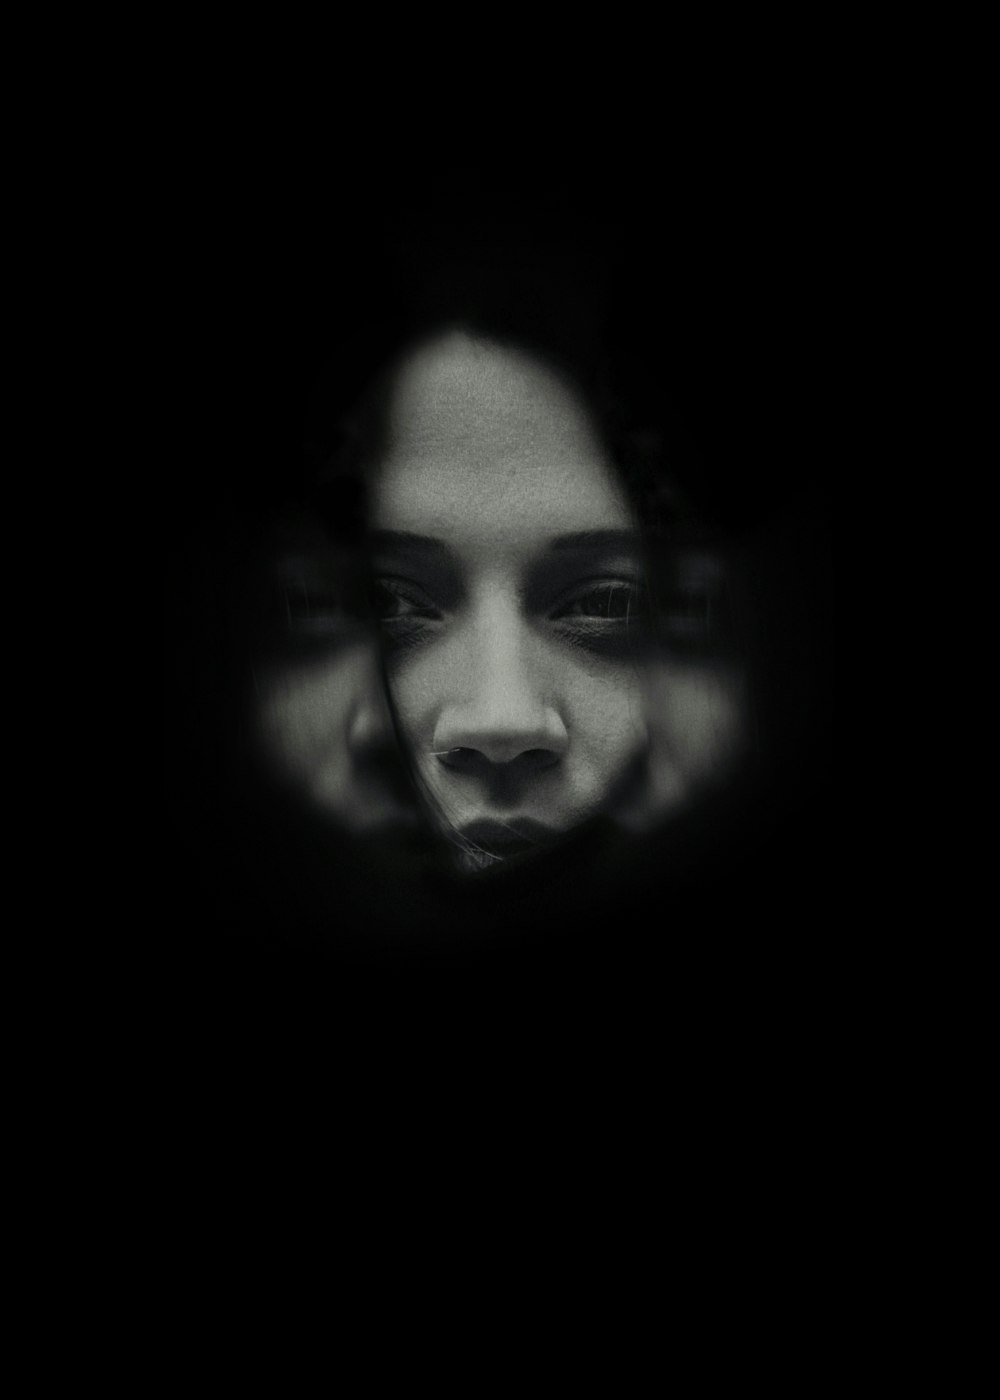 a woman's face is seen through a dark background